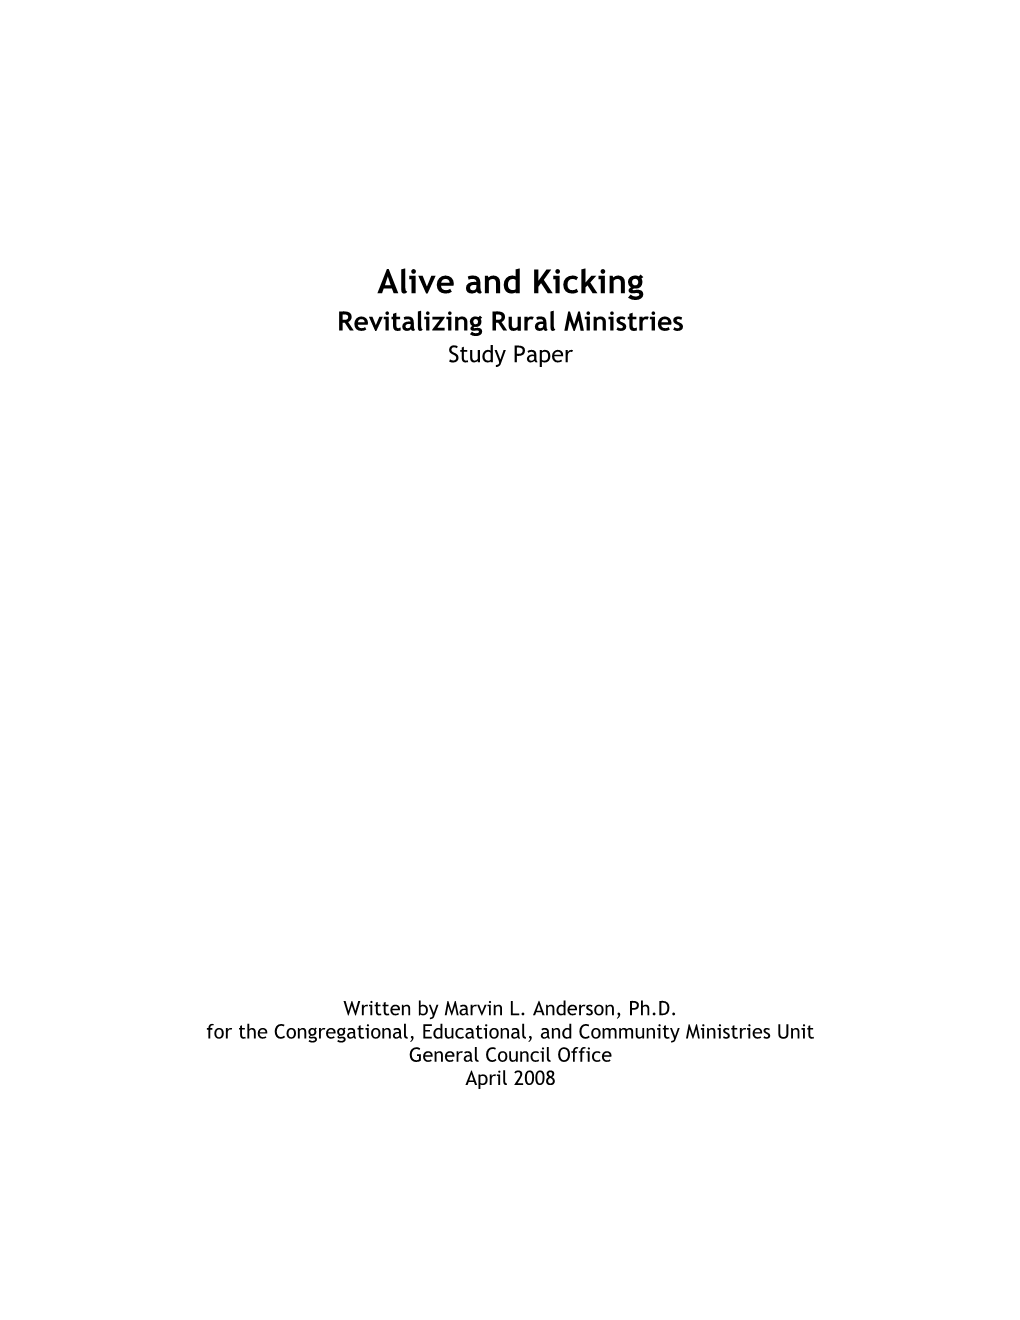 Alive and Kicking Revitalizing Rural Ministries Study Paper